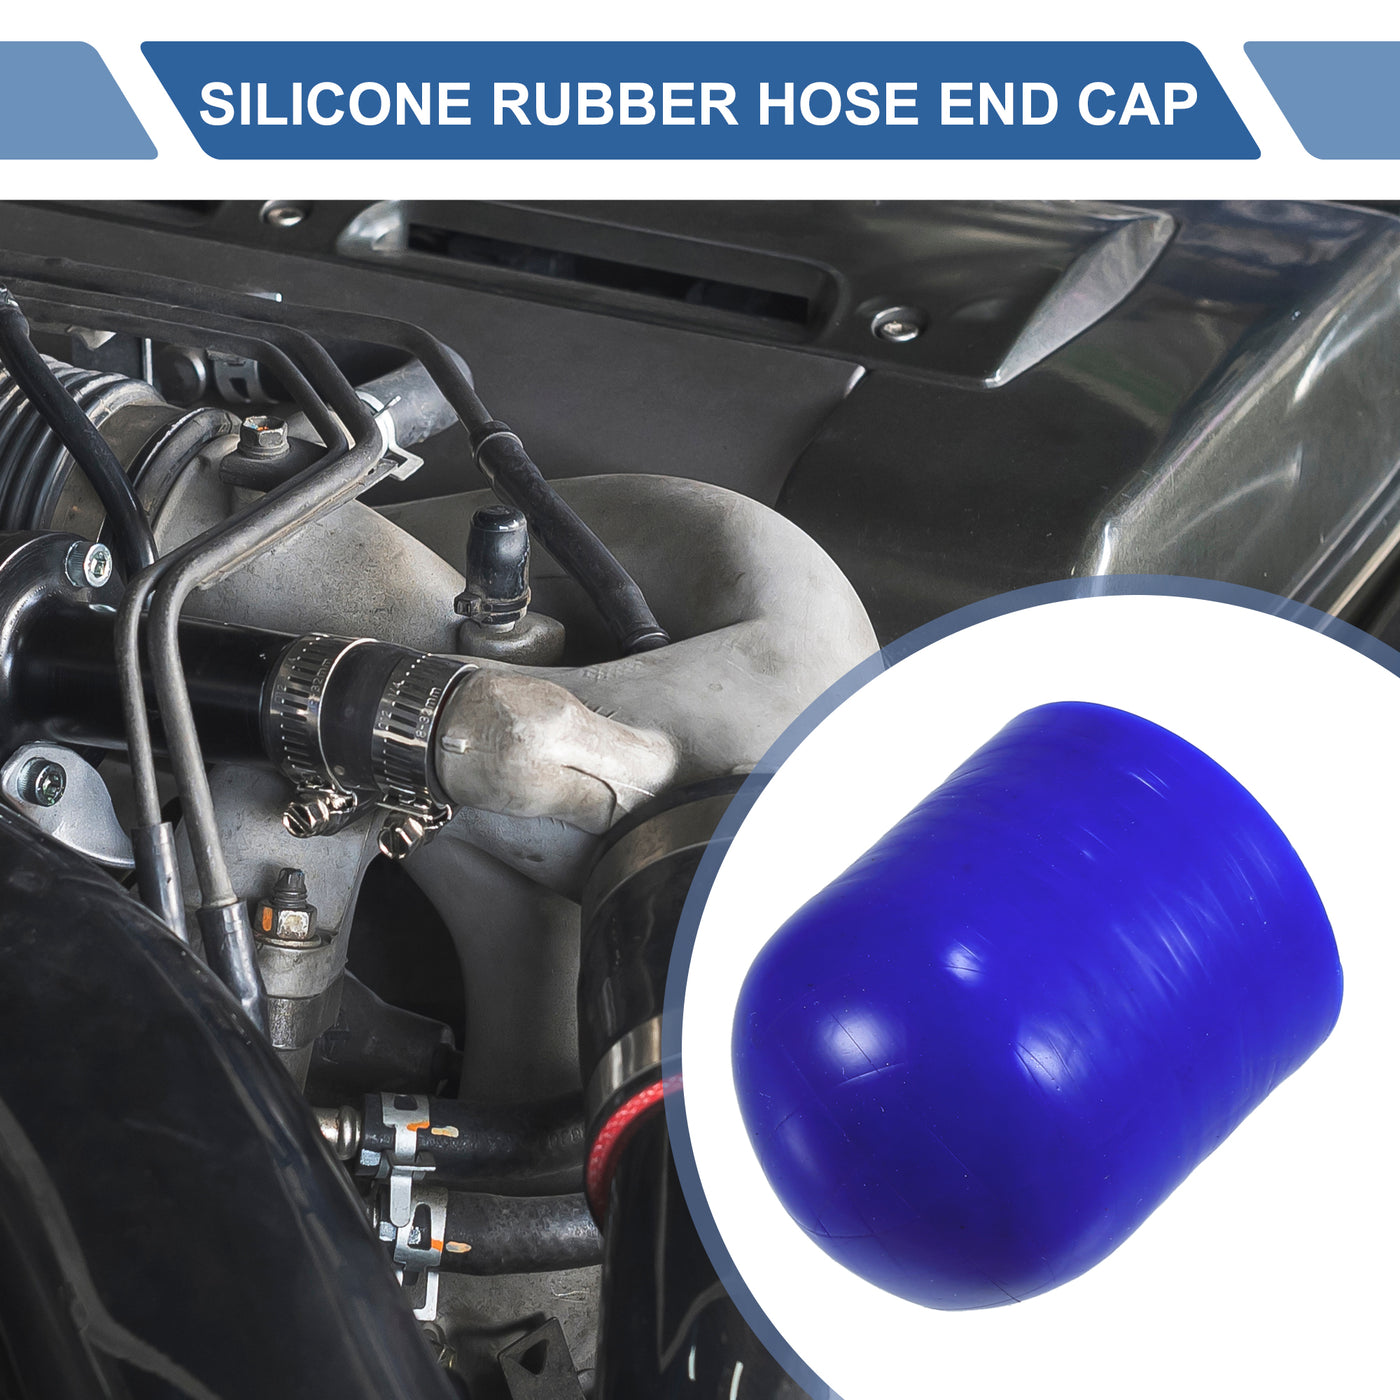 X AUTOHAUX 1 Set 30mm Length 30mm/1.18" ID Blue Car Silicone Rubber Hose End Cap with Clamps Silicone Reinforced Blanking Cap for Bypass Tube Universal